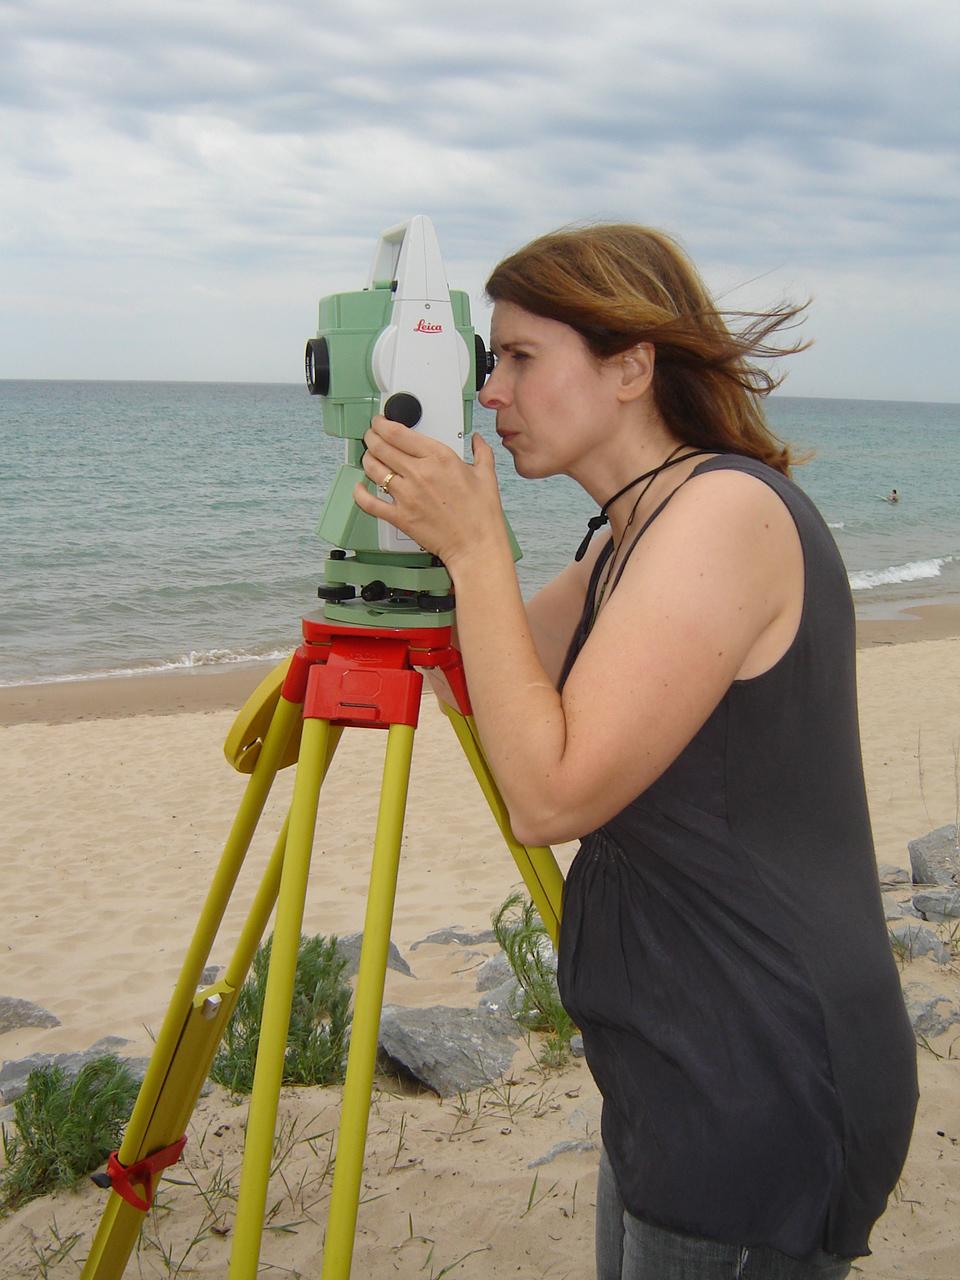 Using a Total Station to record the remains of submerged piers at Empire